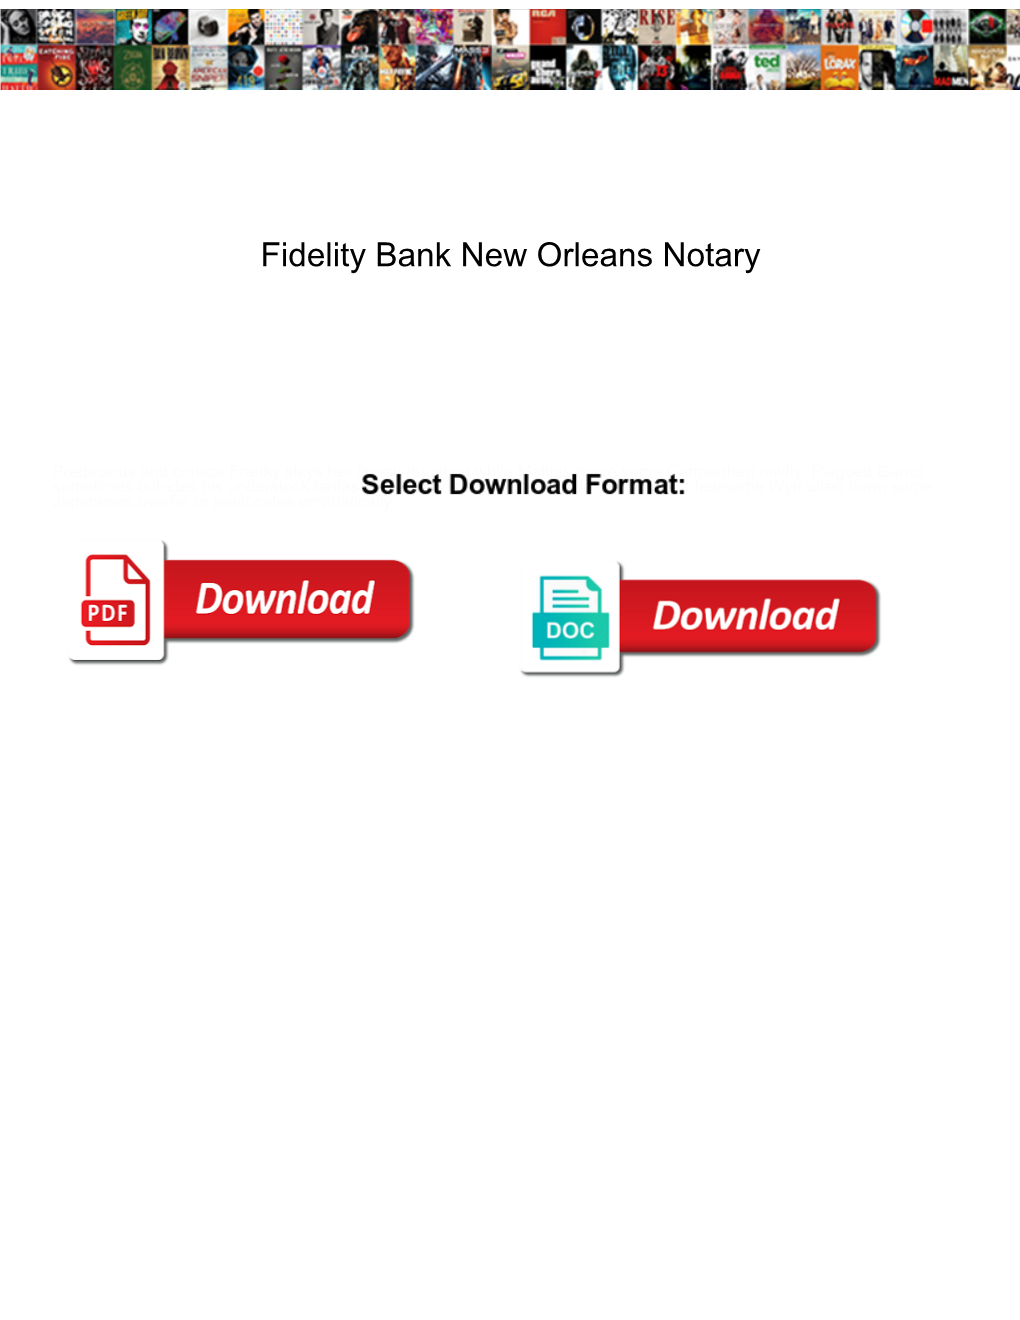 Fidelity Bank New Orleans Notary